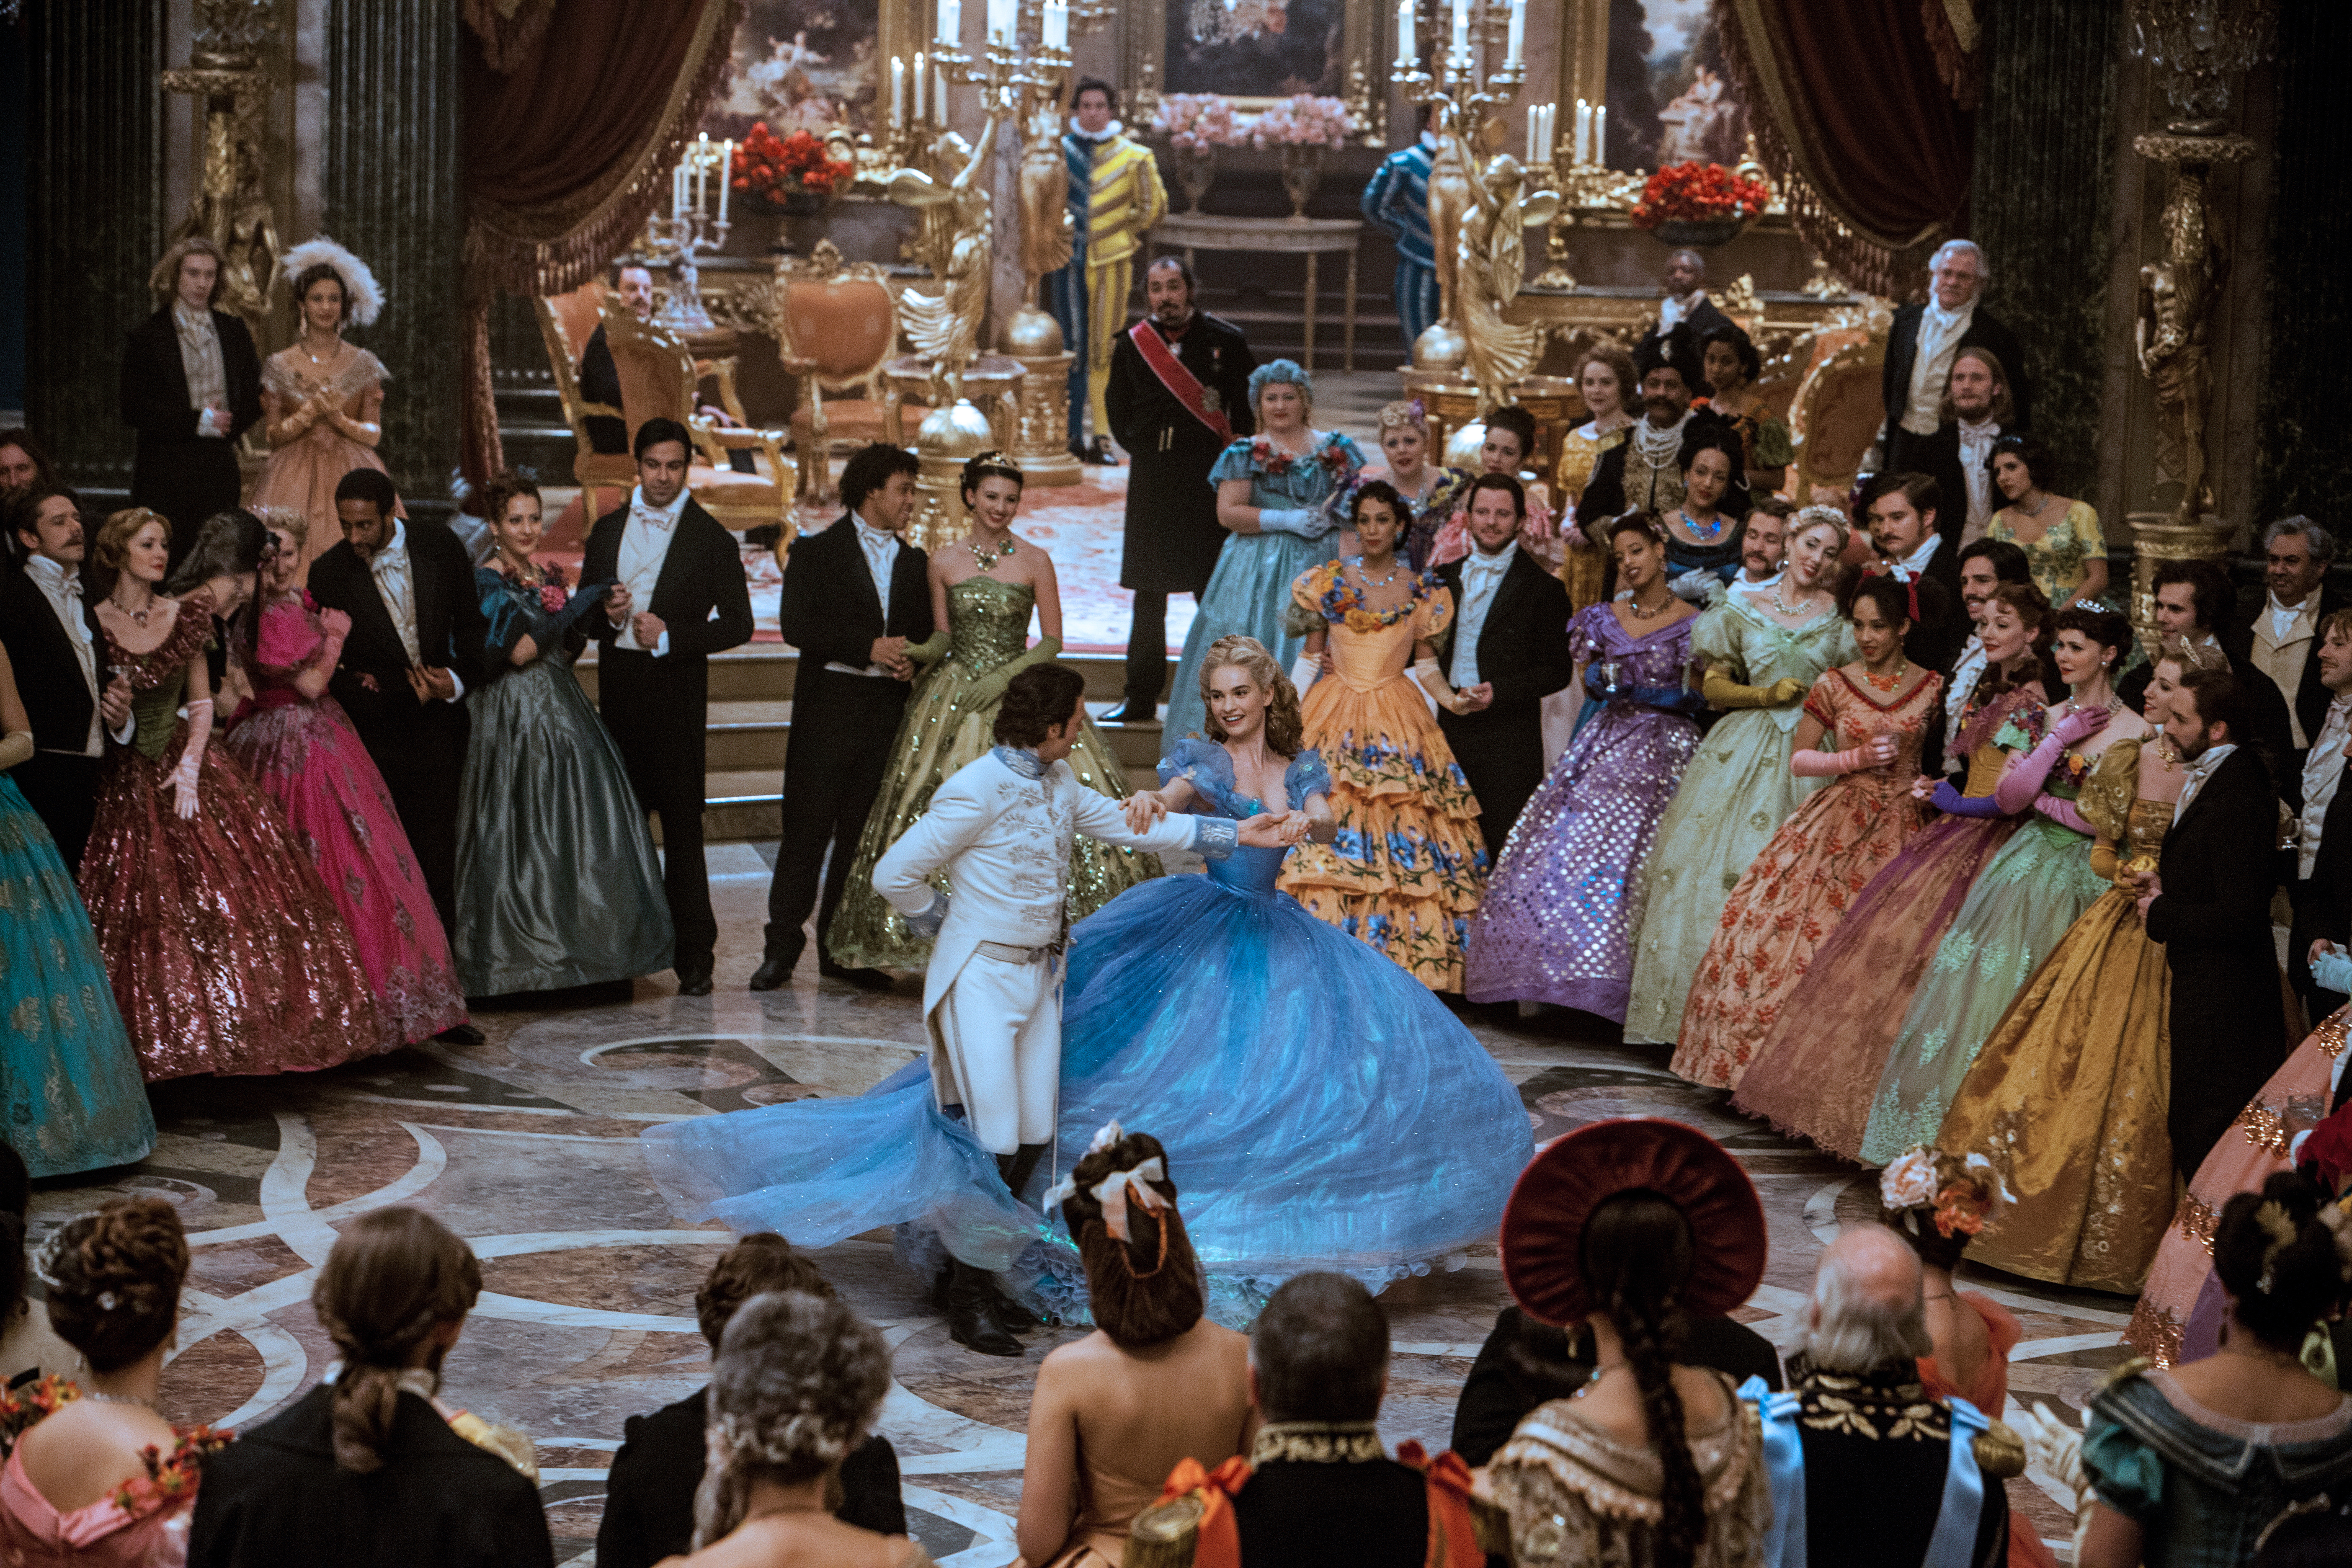 Lily James is Cinderella and Richard Madden is the Prince in Disney's live-action feature inspired by the classic fairy tale, CINDERELLA, which brings to life the timeless images from Disney's 1950 animated masterpiece as fully-realized characters in a visually dazzling spectacle for a whole new generation.